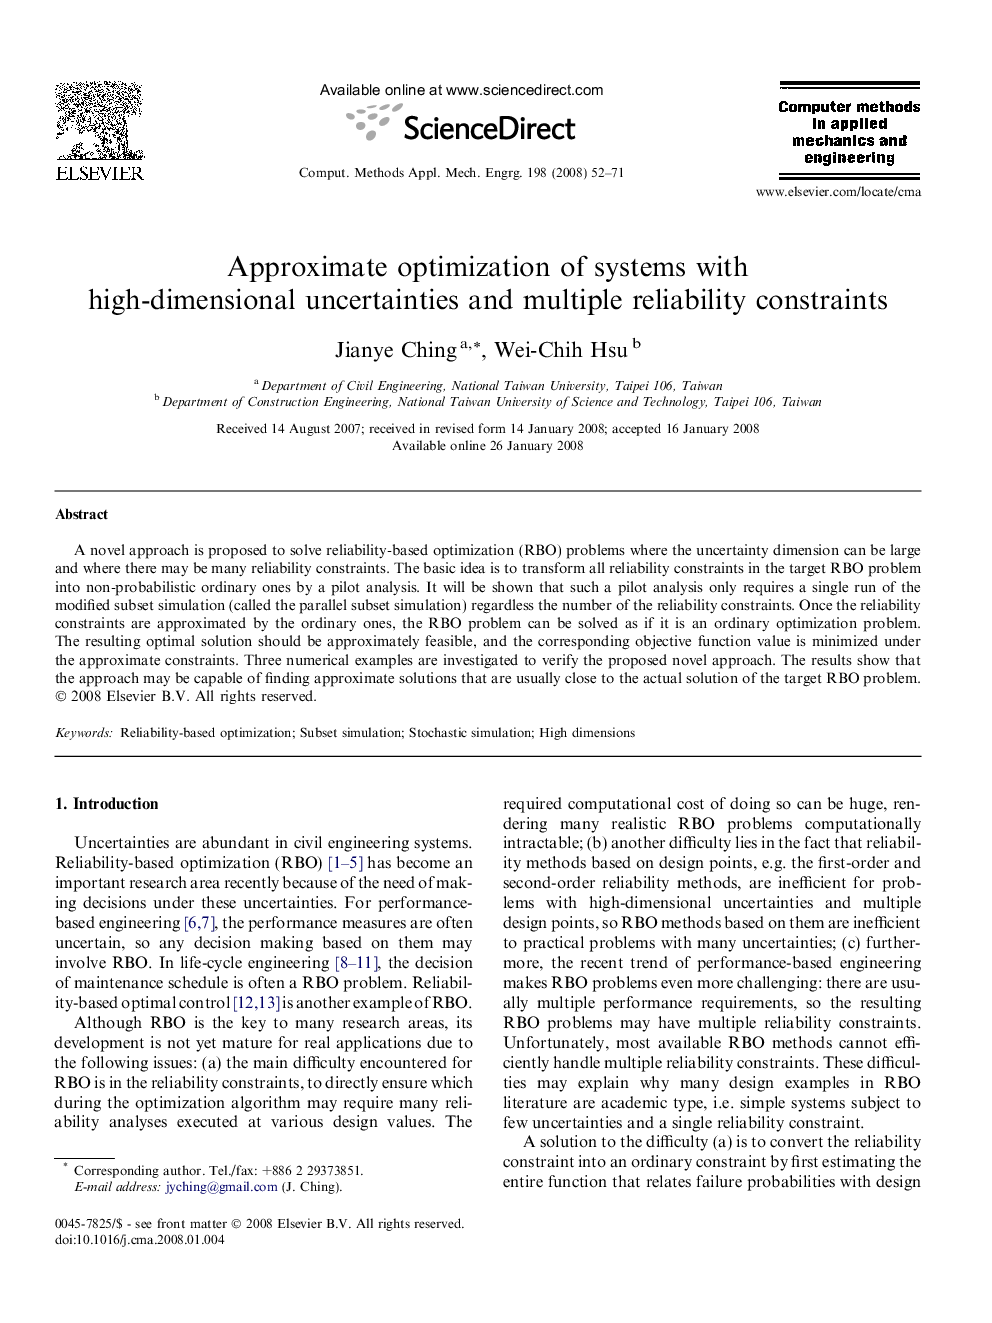 Approximate optimization of systems with high-dimensional uncertainties and multiple reliability constraints